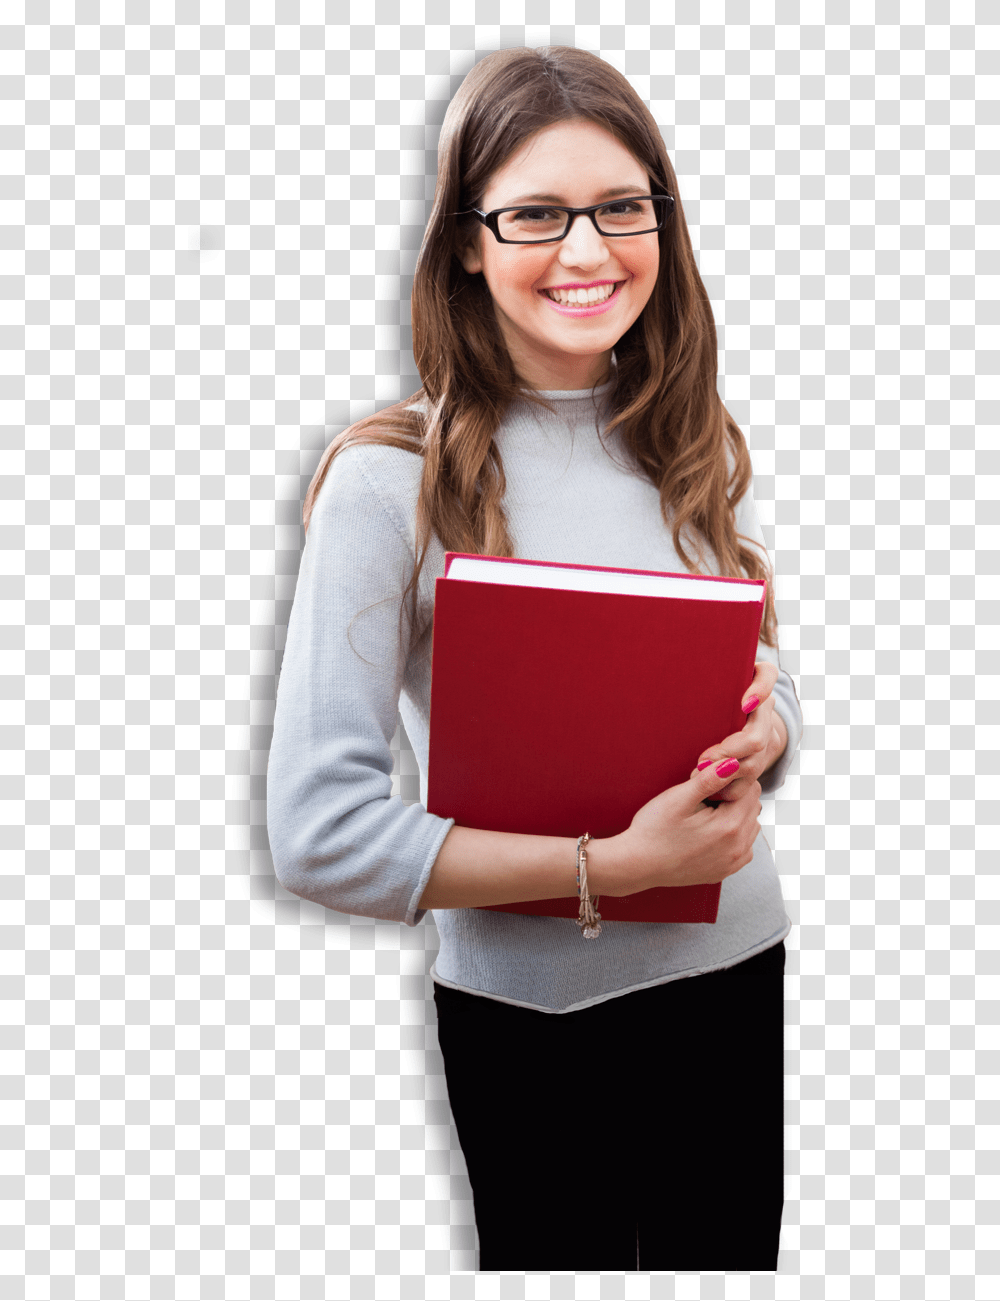 Girl Holding Book Images Of Girl With Books, Person, Human, Female, Glasses Transparent Png